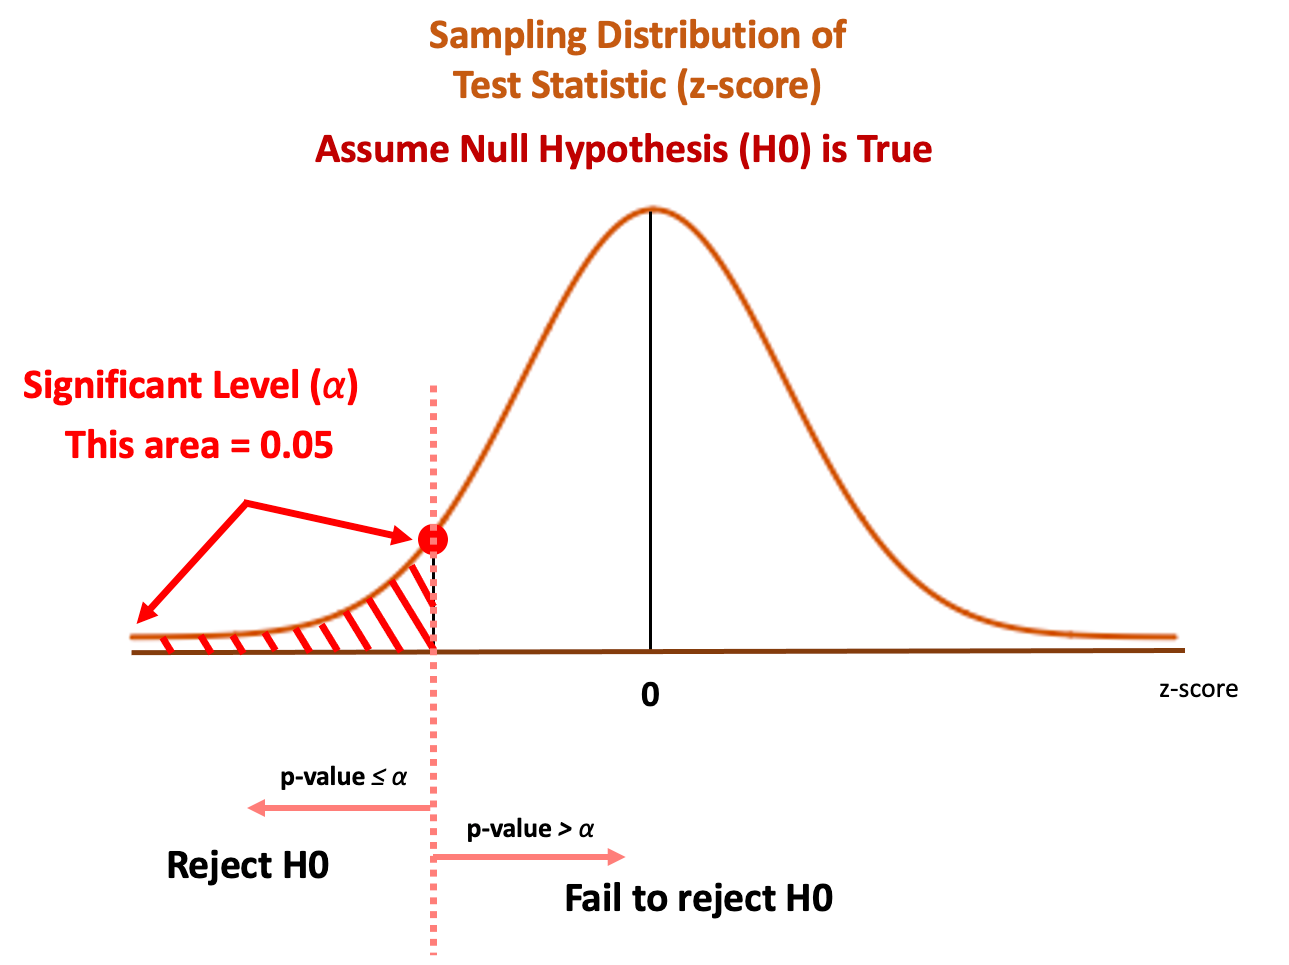 null hypothesis .05 level